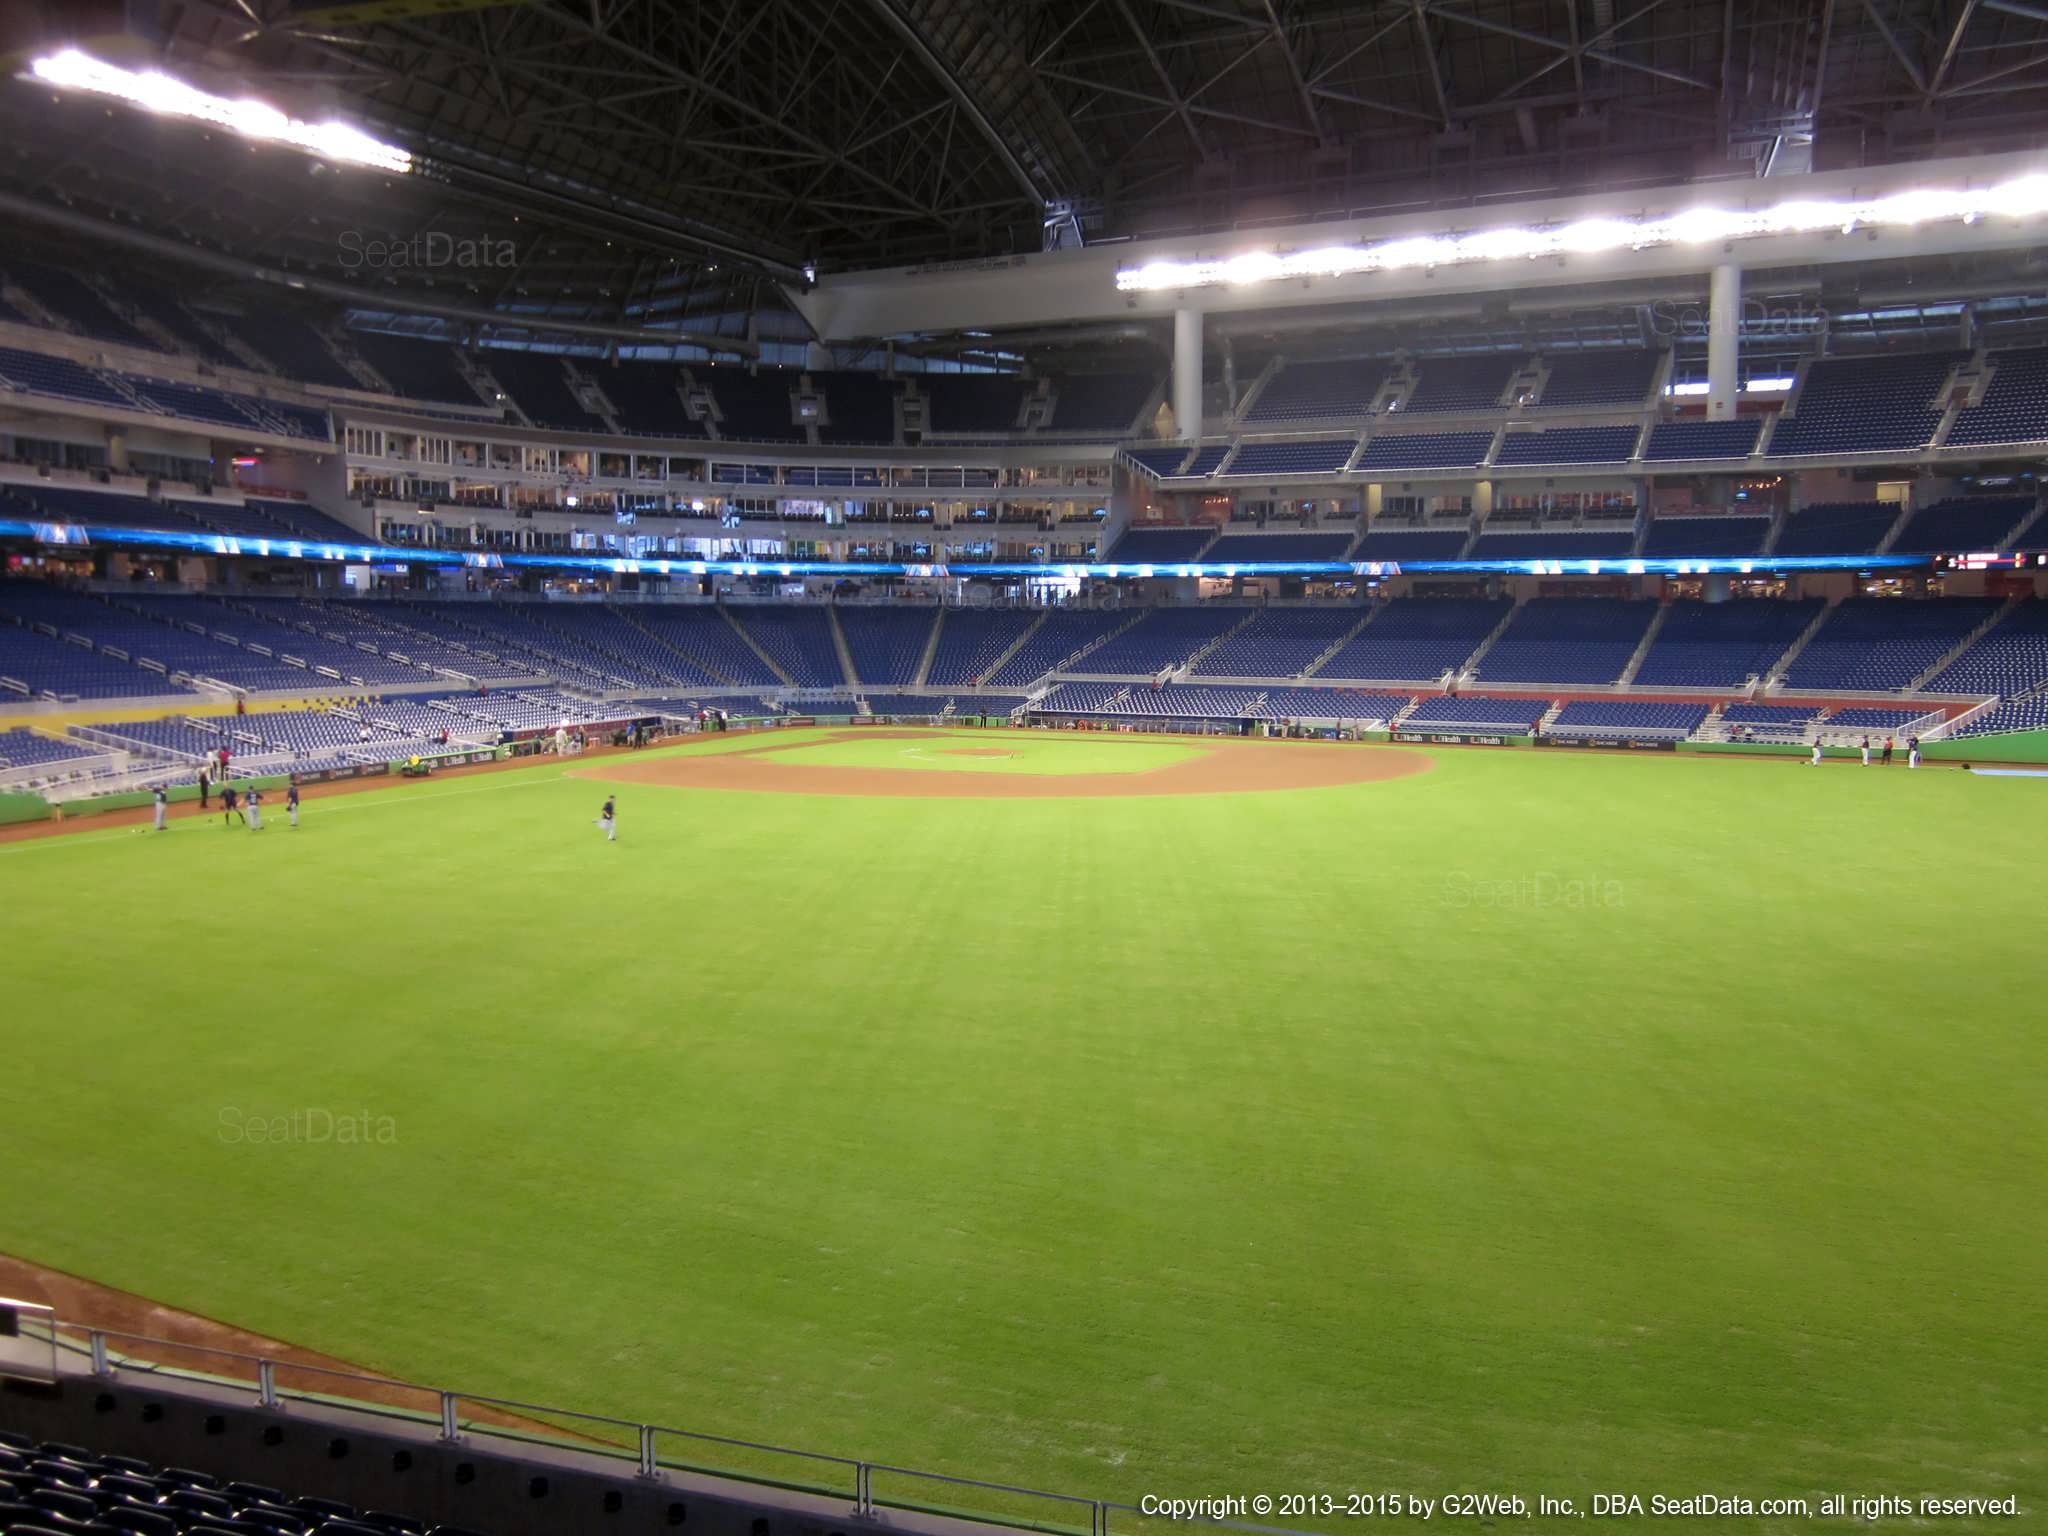 Seat view from section 36 at Marlins Park, home of the Miami Marlins